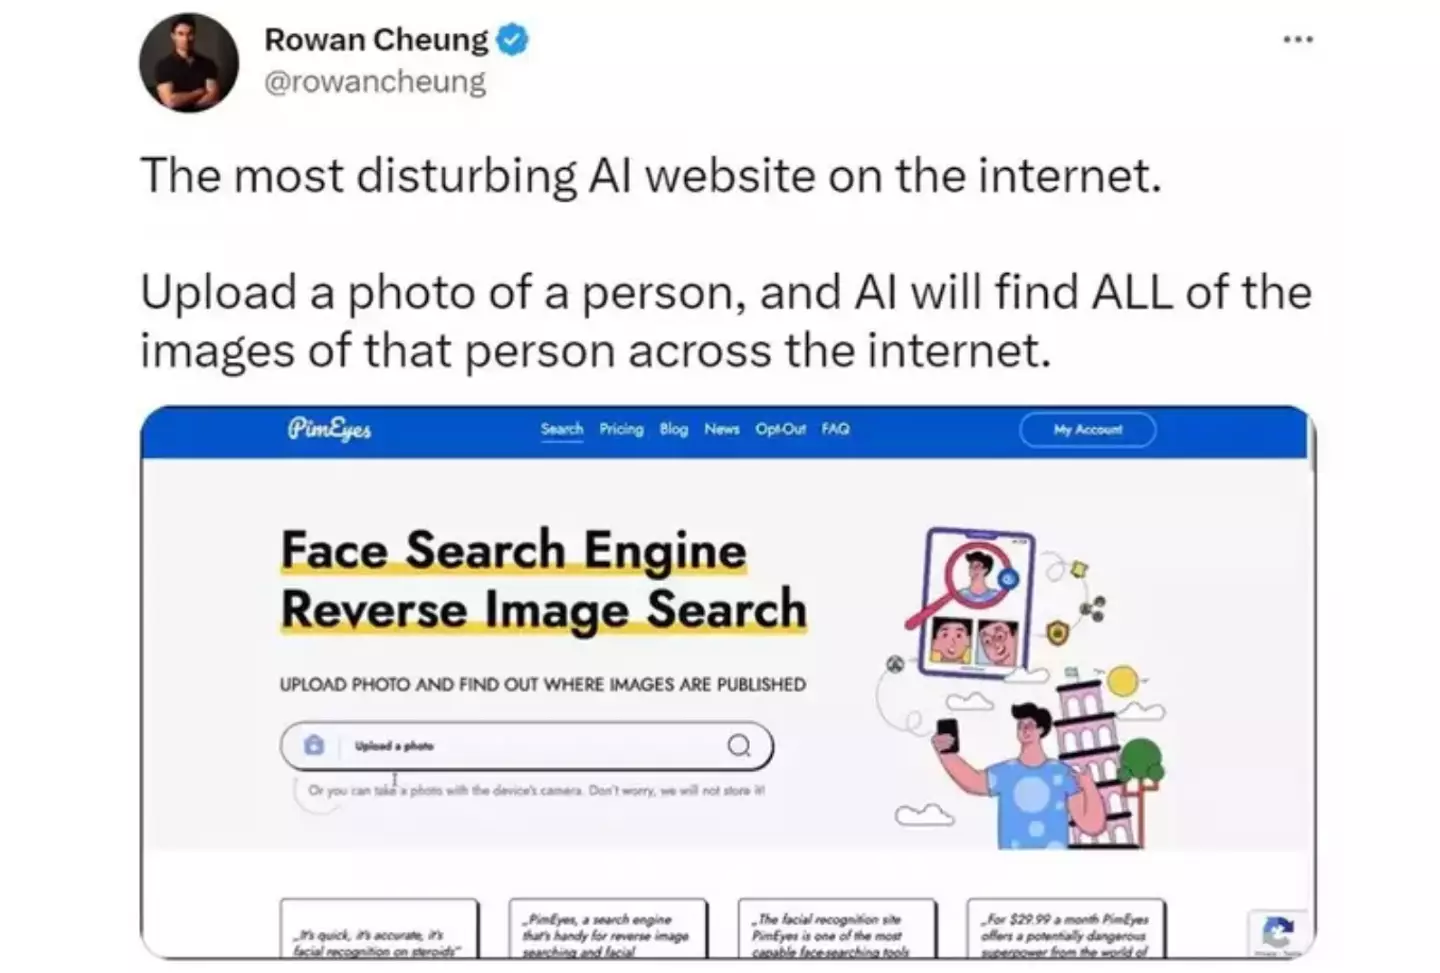 The website has been dubbed 'the most disturbing AI website on the Internet'.